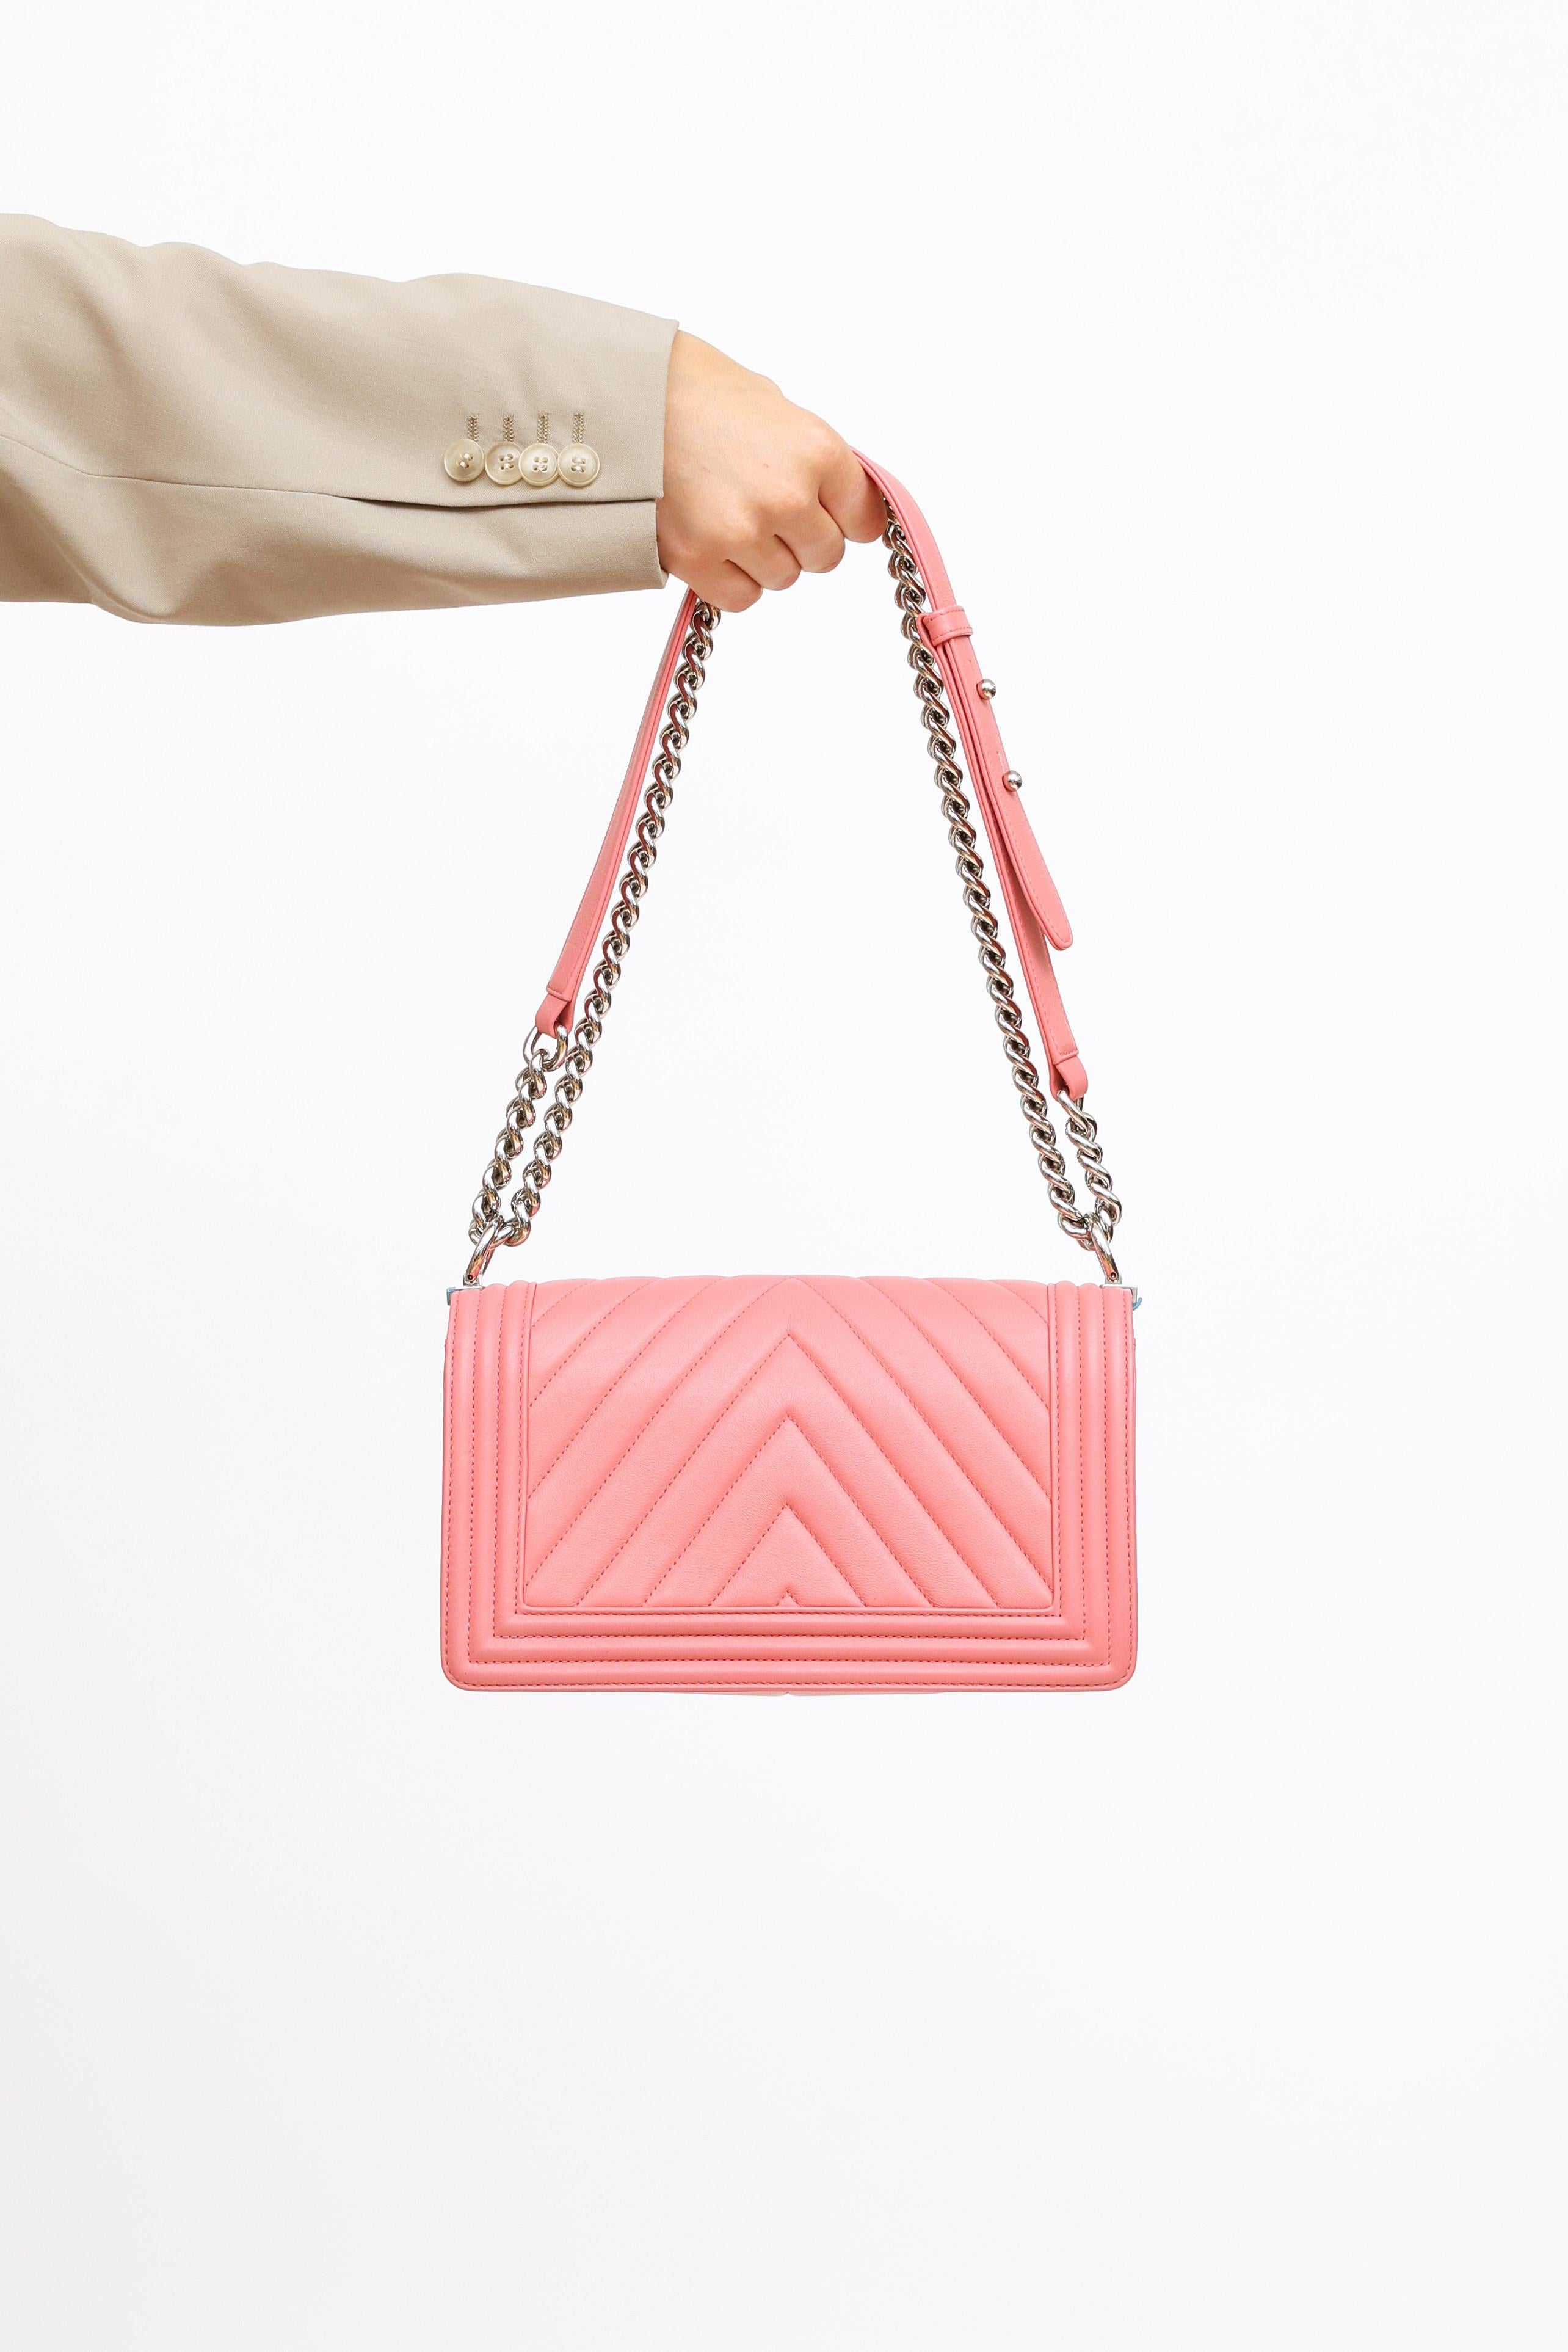 Pre-owned Chanel medium pink handbag featuring quilted chevron leather exterior, silver-toned hardware and interlocking logo push lock closure at front. Textile lining with 1 slip pocket at interior. From Series 2022 from 2016 collection.

Includes